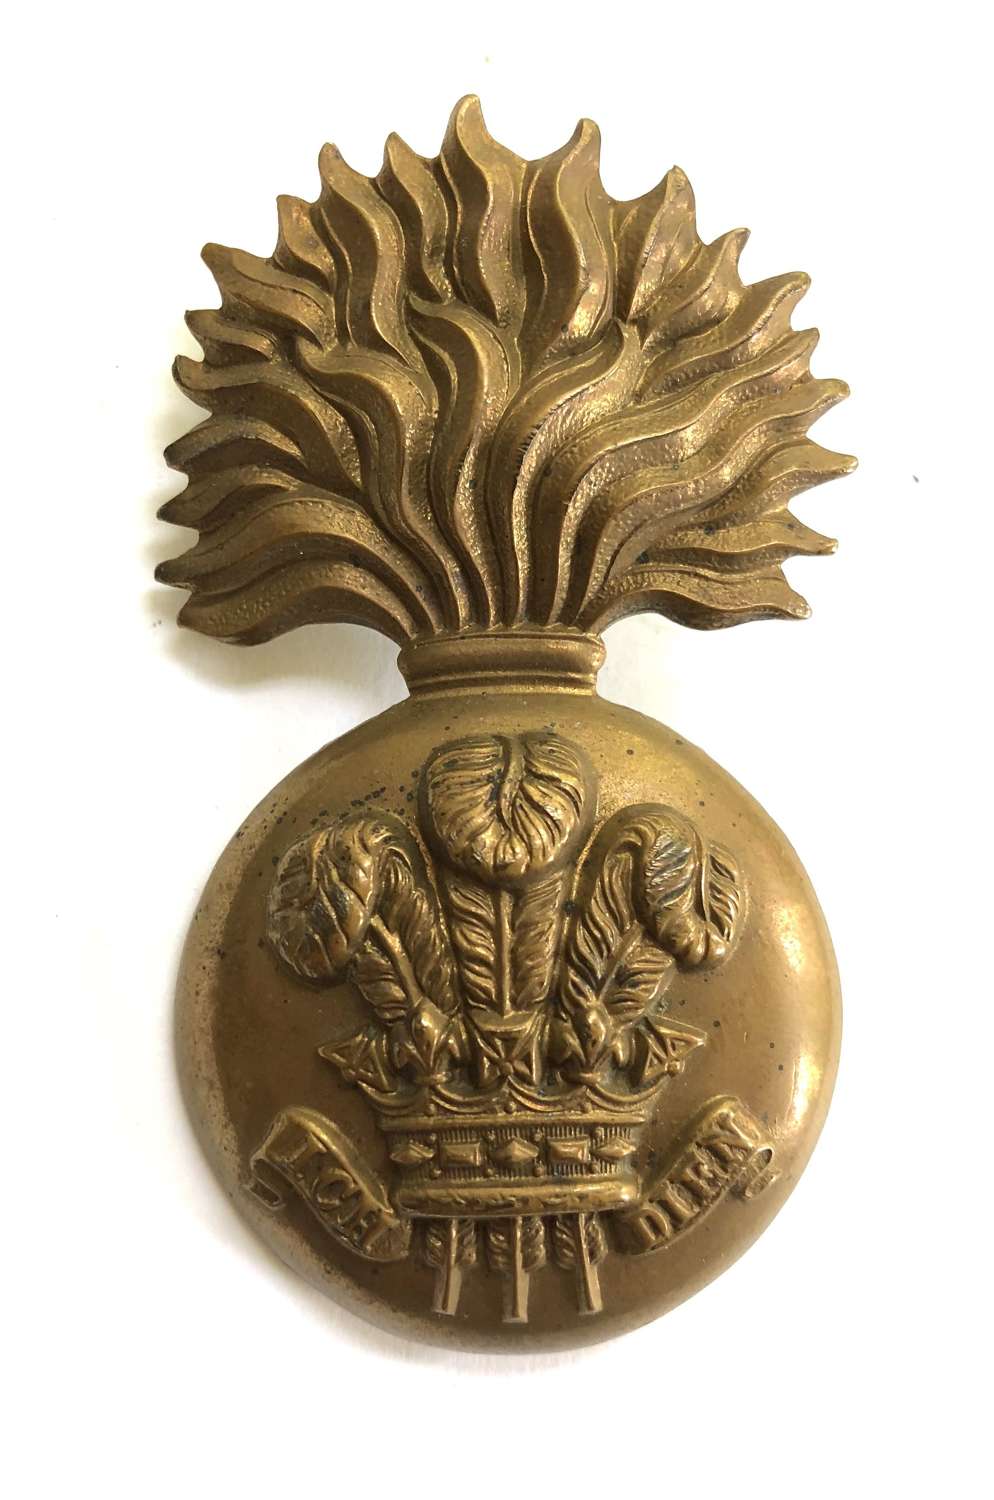 Royal Welsh Fusiliers Victorian glengarry badge circa 1881-96